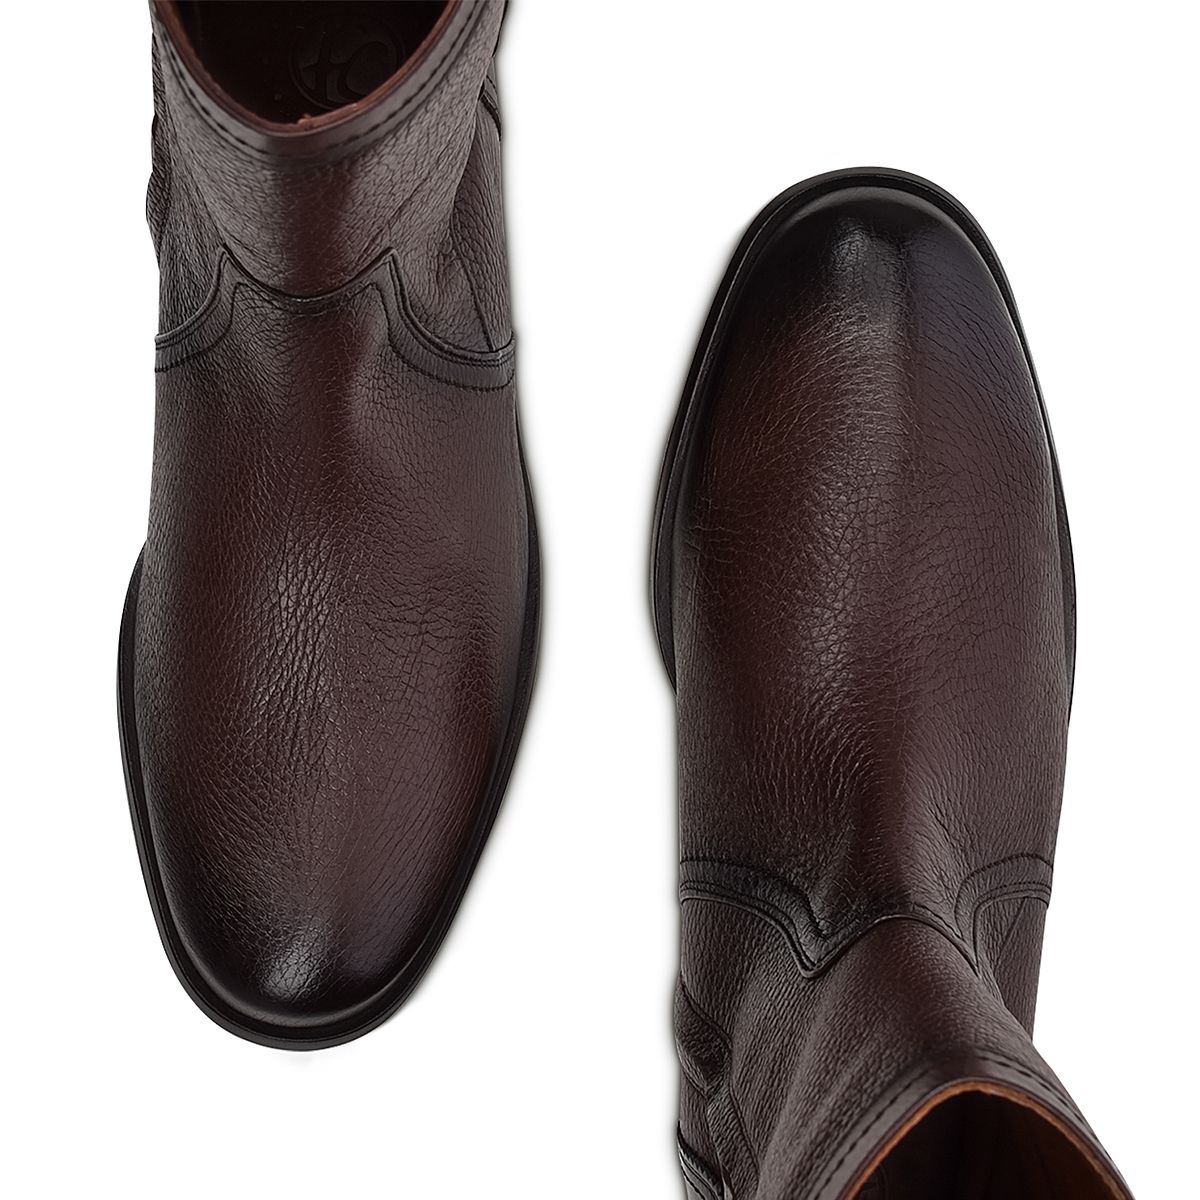 1S1BSVN - Cuadra brown casual fashion calf leather ankle boots for men-FRANCO CUADRA-Kuet-Cuadra-Boots